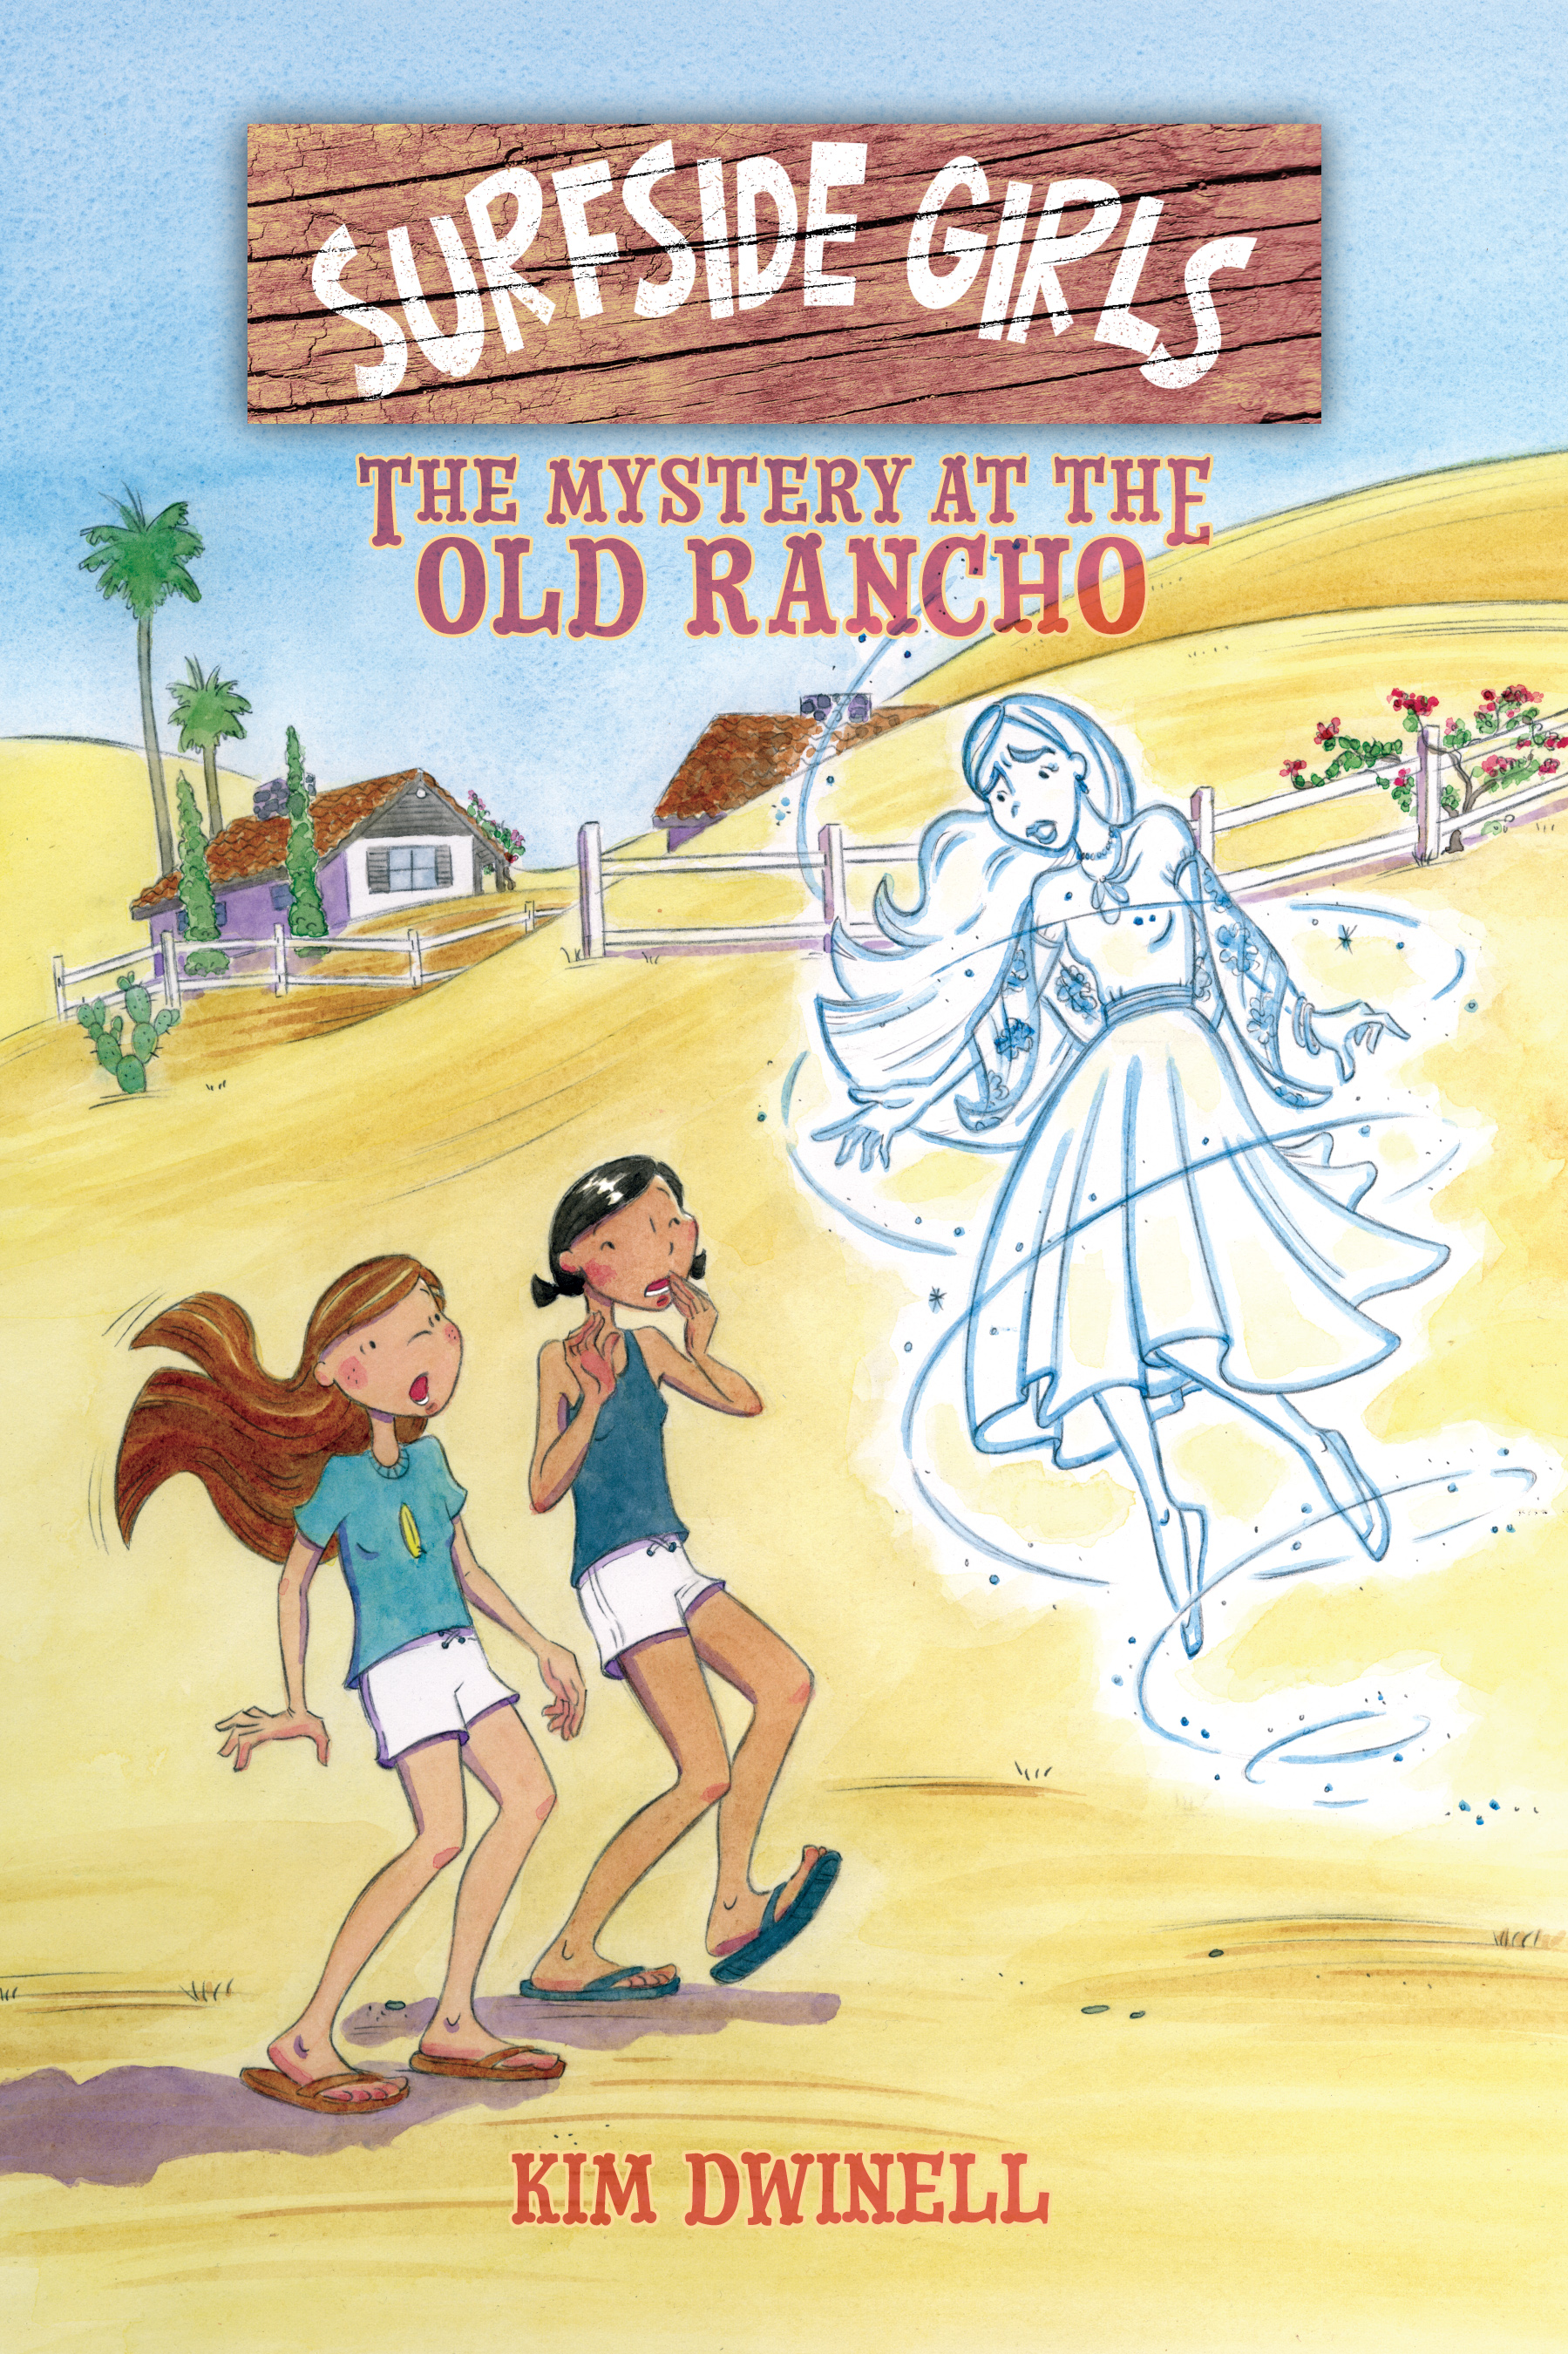 Read online Surfside Girls: The Mystery At the Old Rancho comic -  Issue # TPB (Part 1) - 1